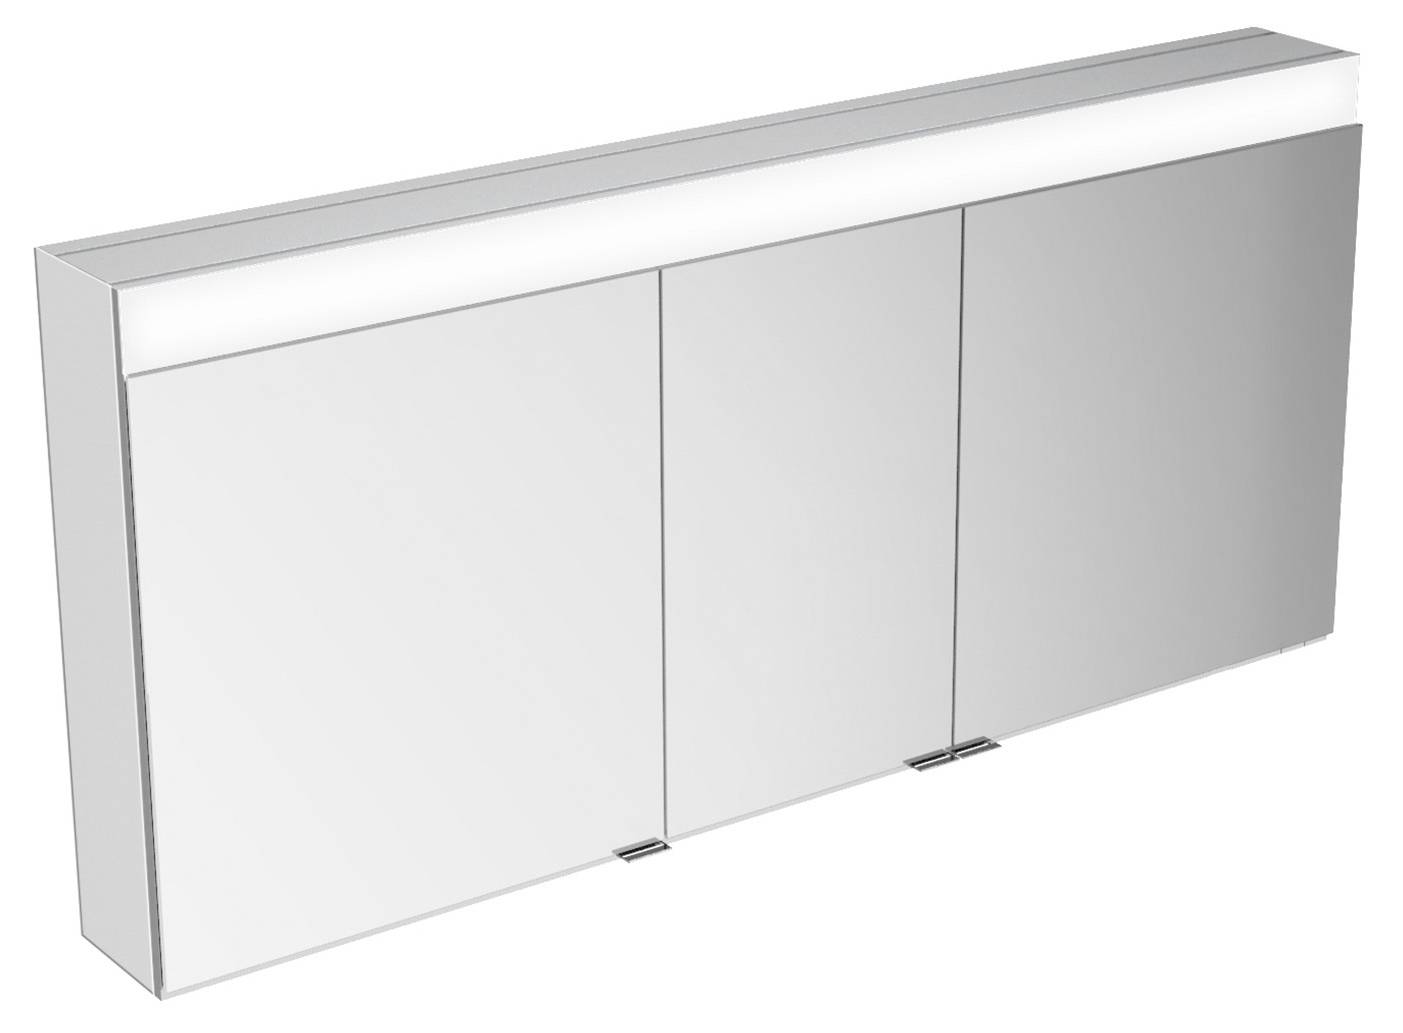 Bathroom Mirror Cabinet - (3 Door) with Lighting - Recessed & Wall Mounted options - EDITION 400 - Mirror cabinet